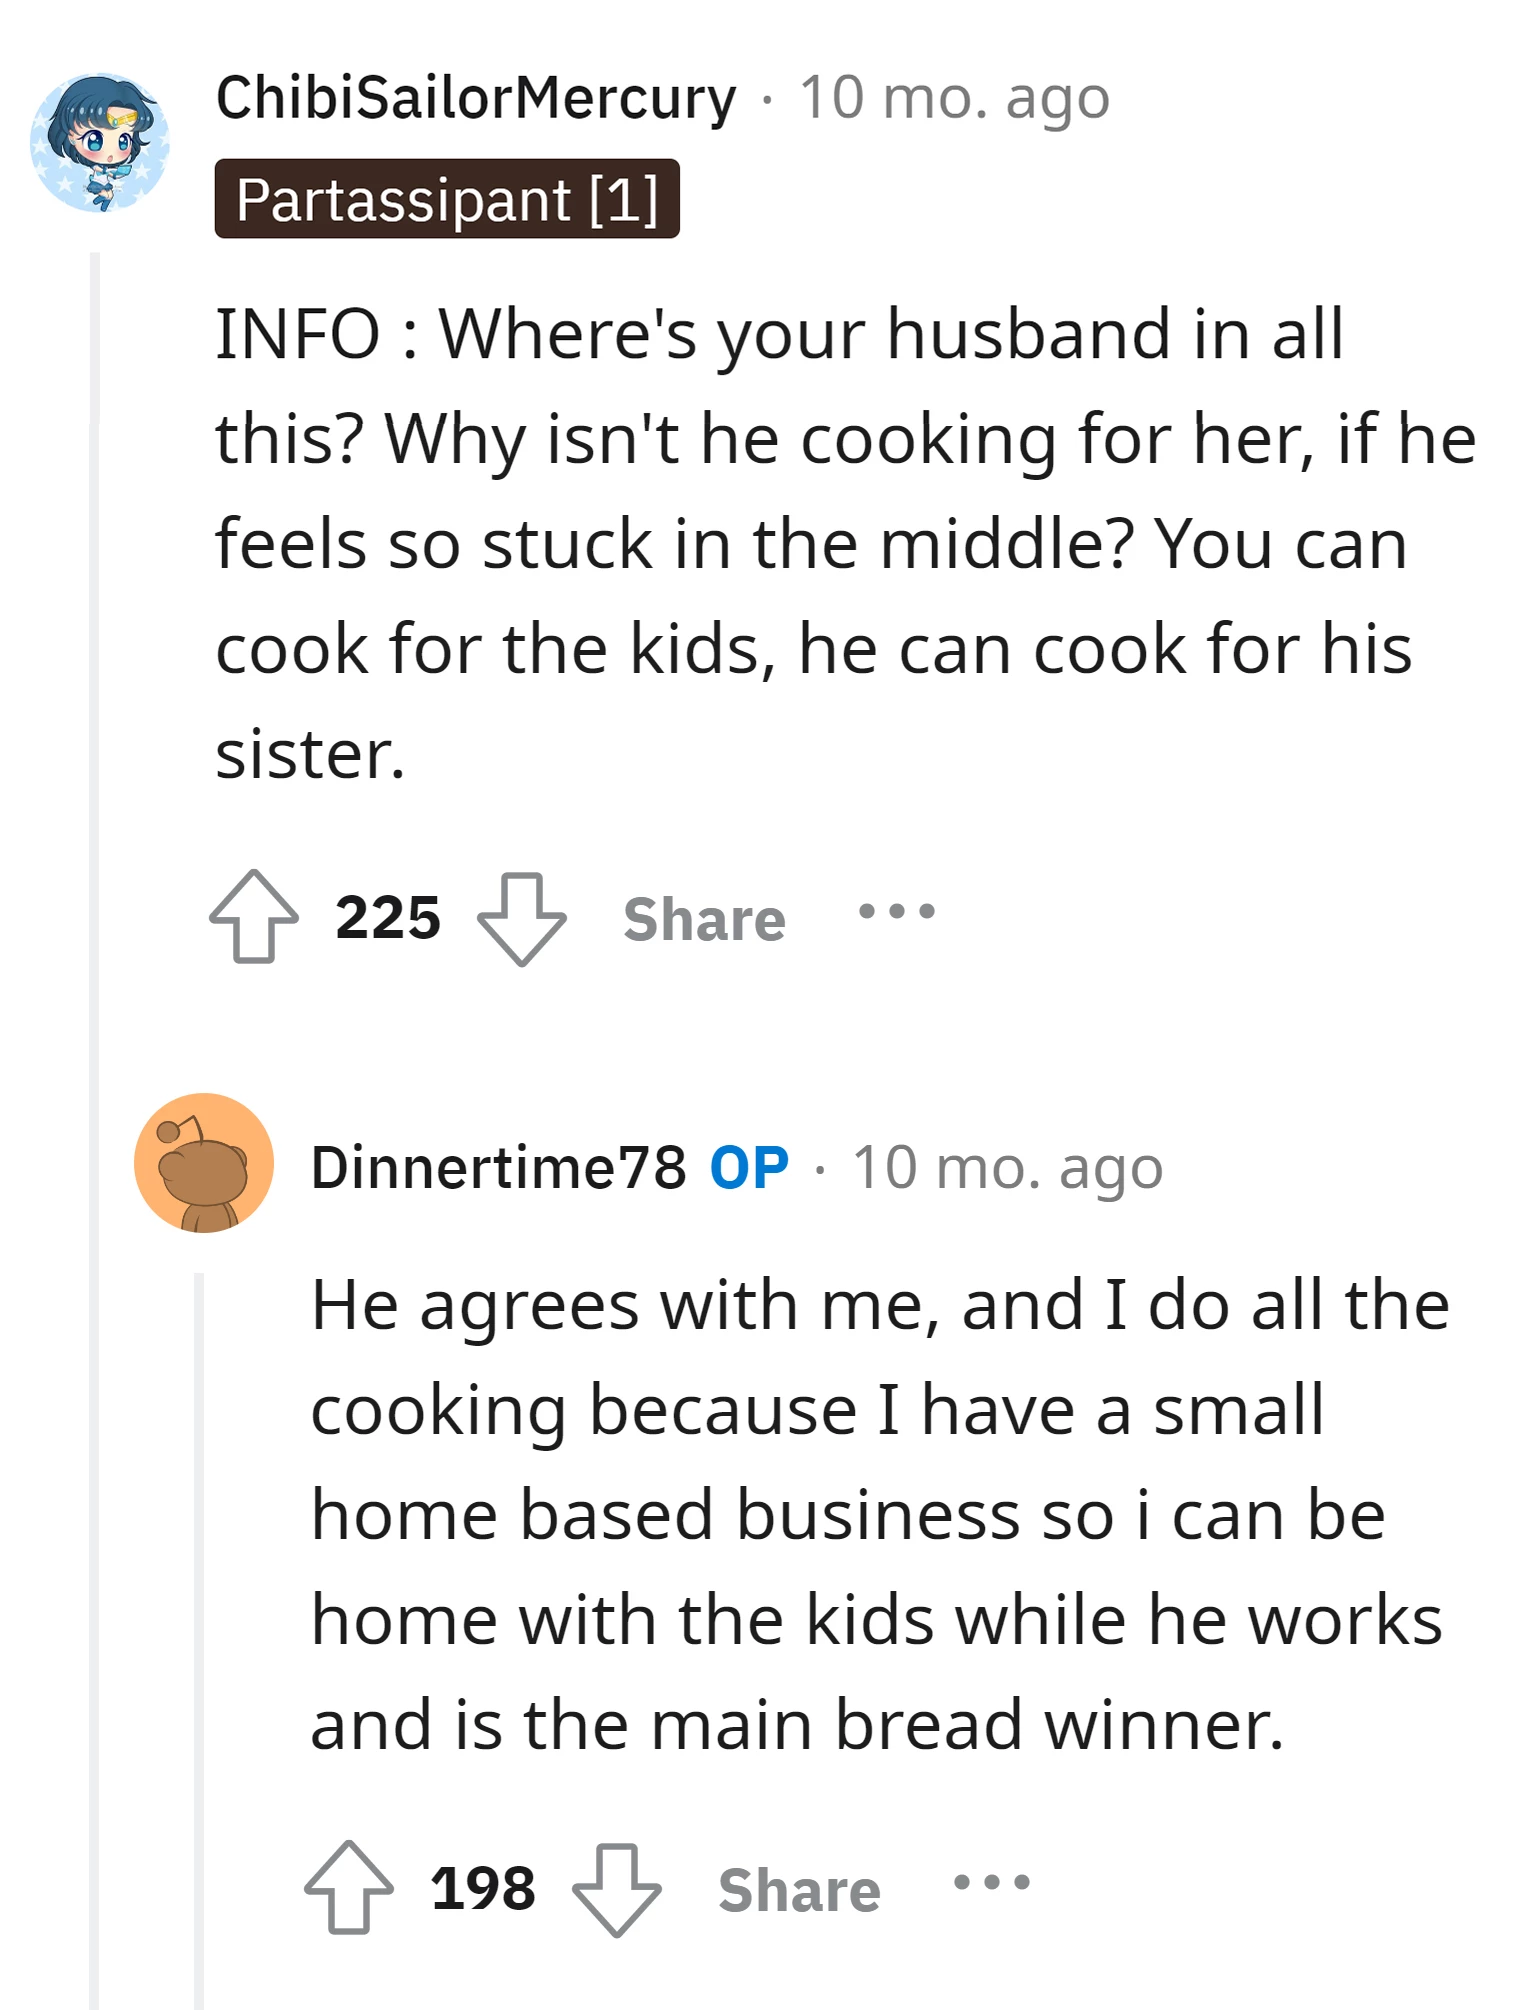 OP does all the cooking because she has a small home-based business, allowing her to be home with the kids